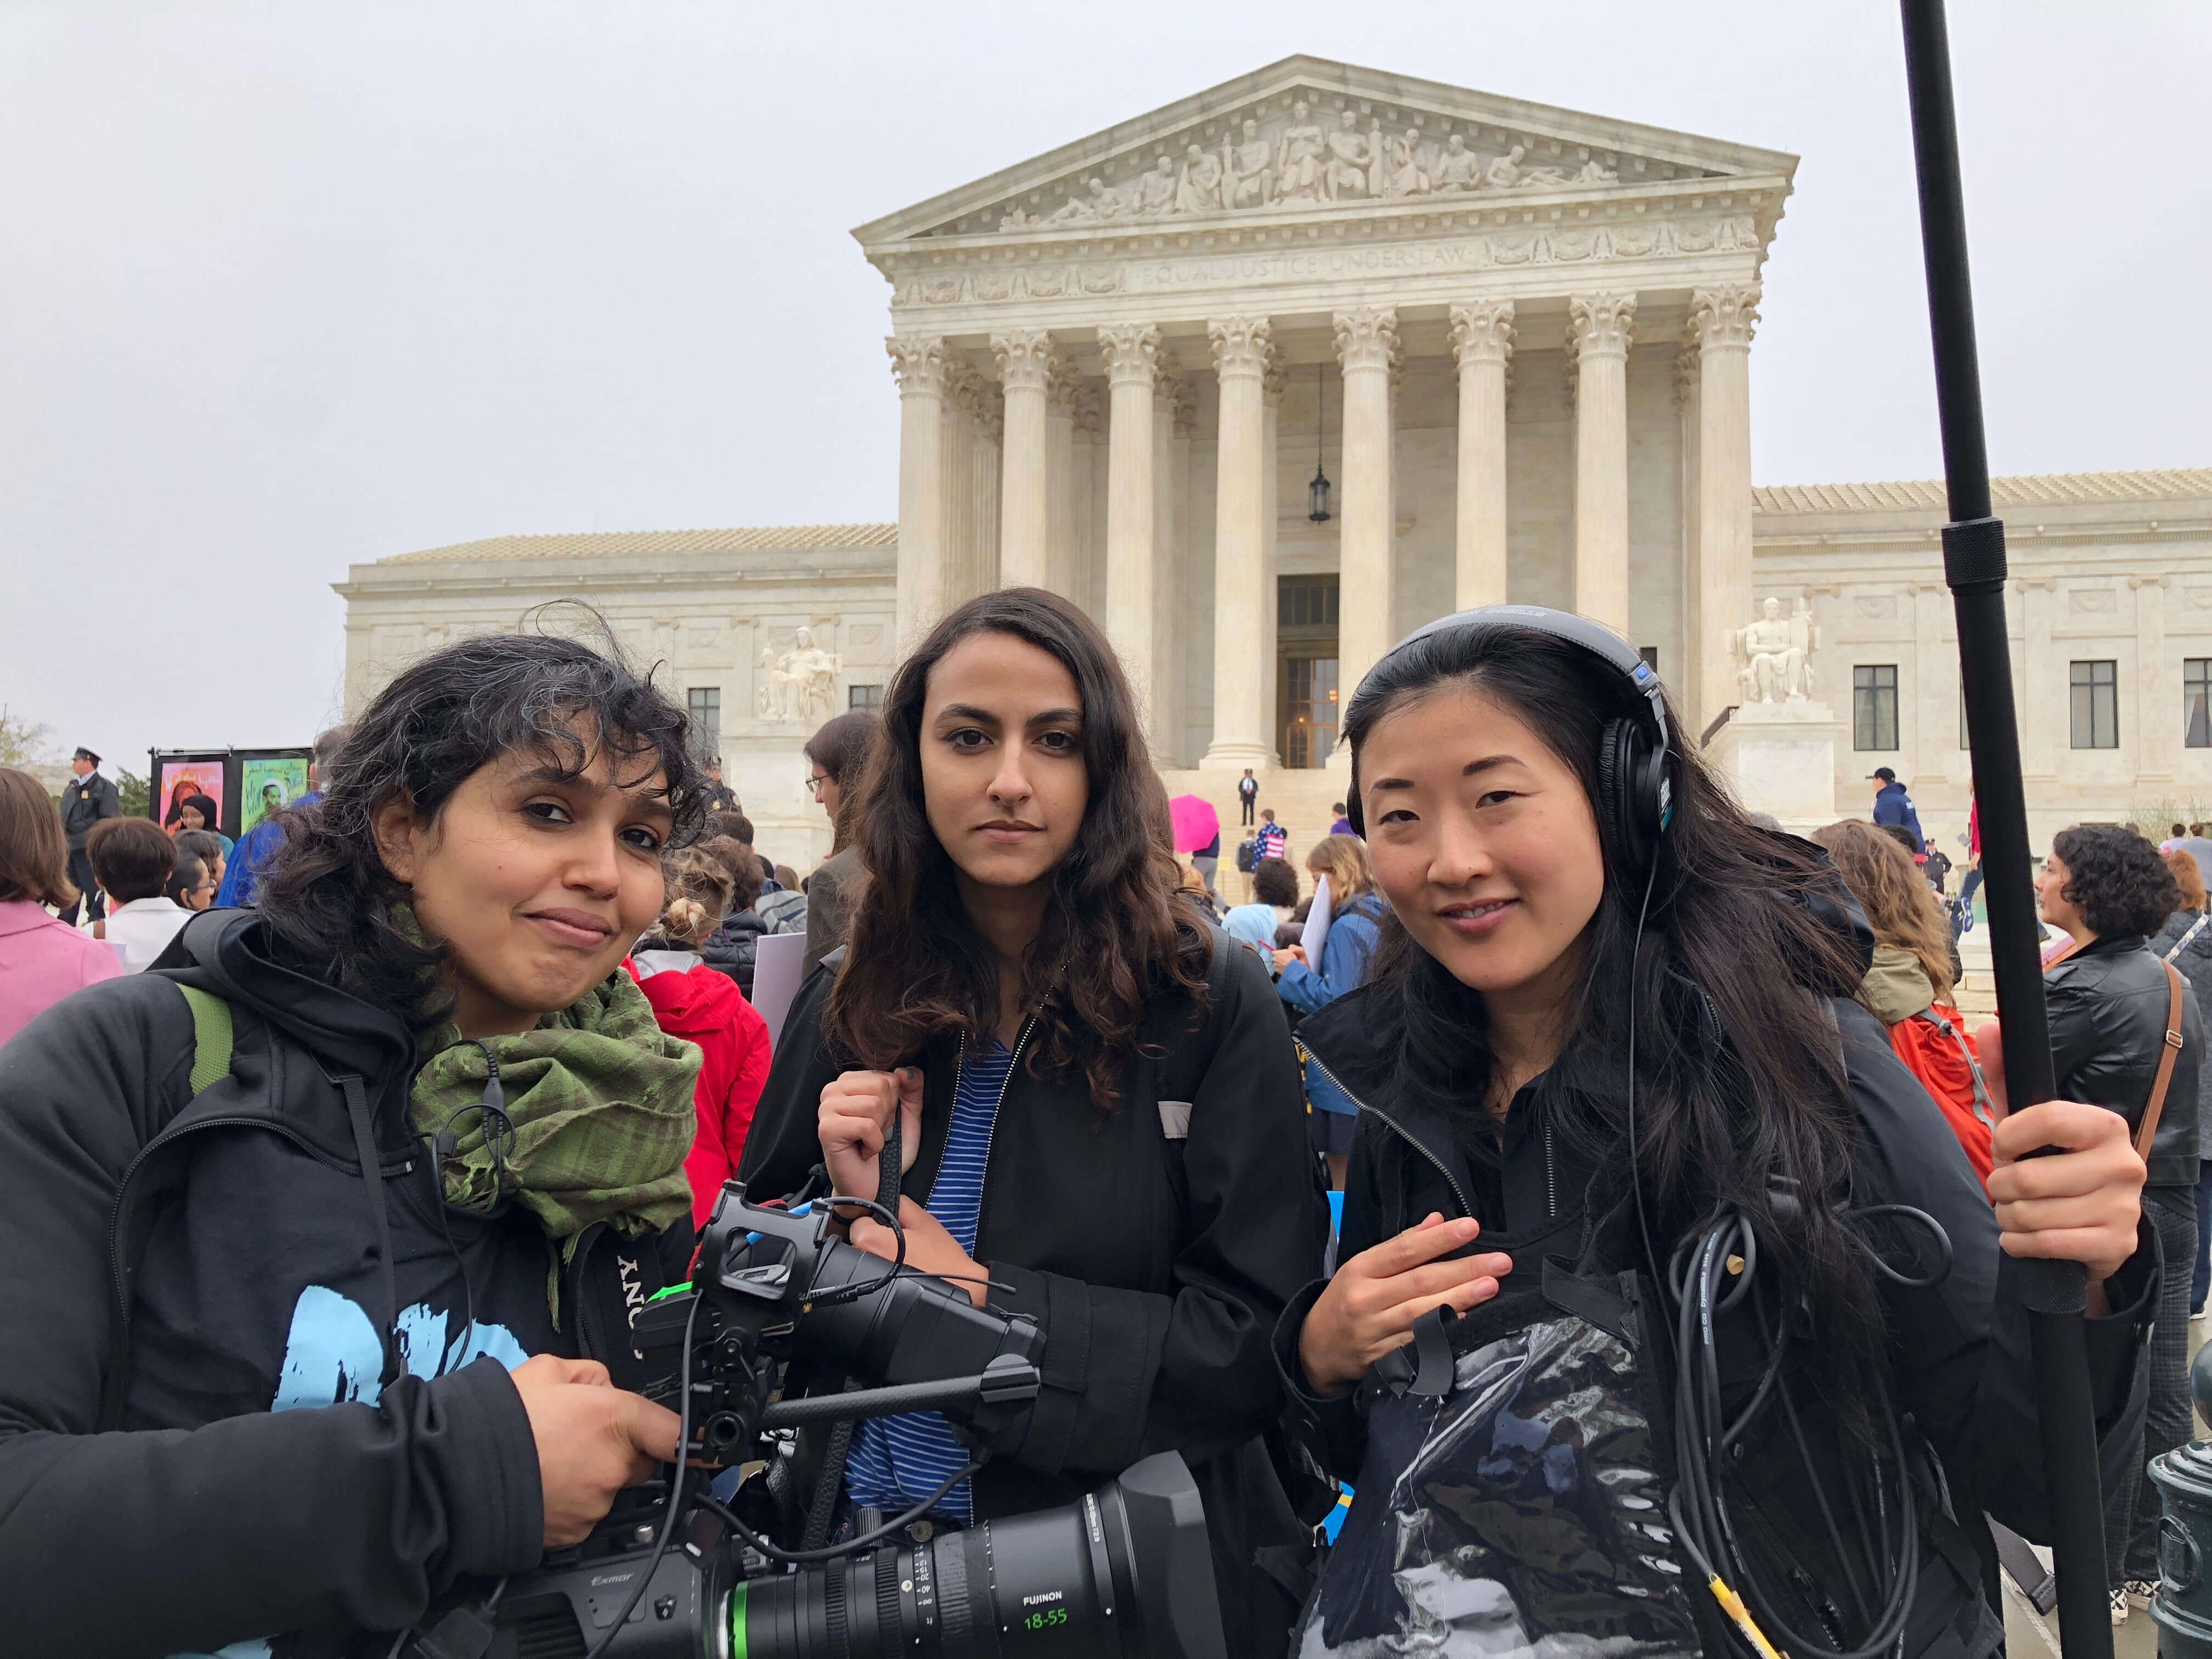 Production still of An Act of Worship. Three women dressed in black of the film's production crew are standing in front of the United States Supreme Court, director Nausheen Dadabhoy, to the left, is holding a camera.